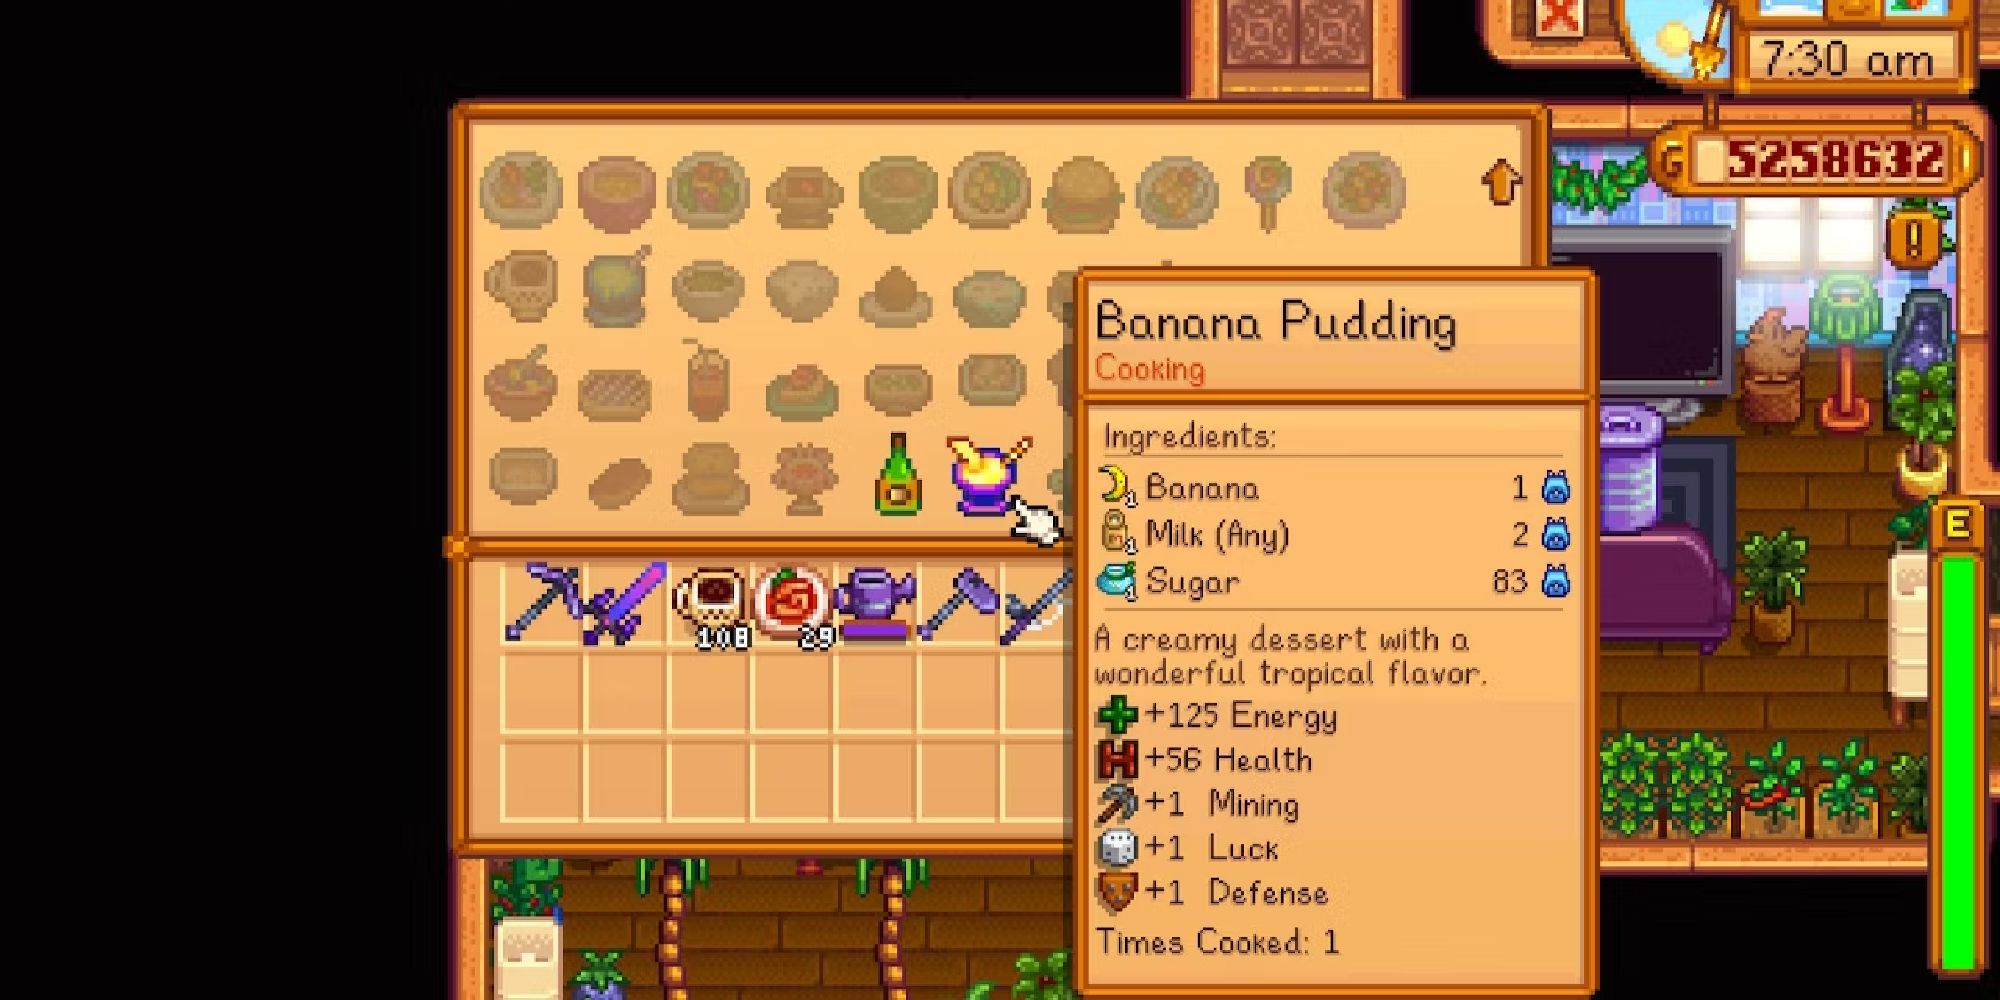 stardew valley cooking menu with banana pudding info box open